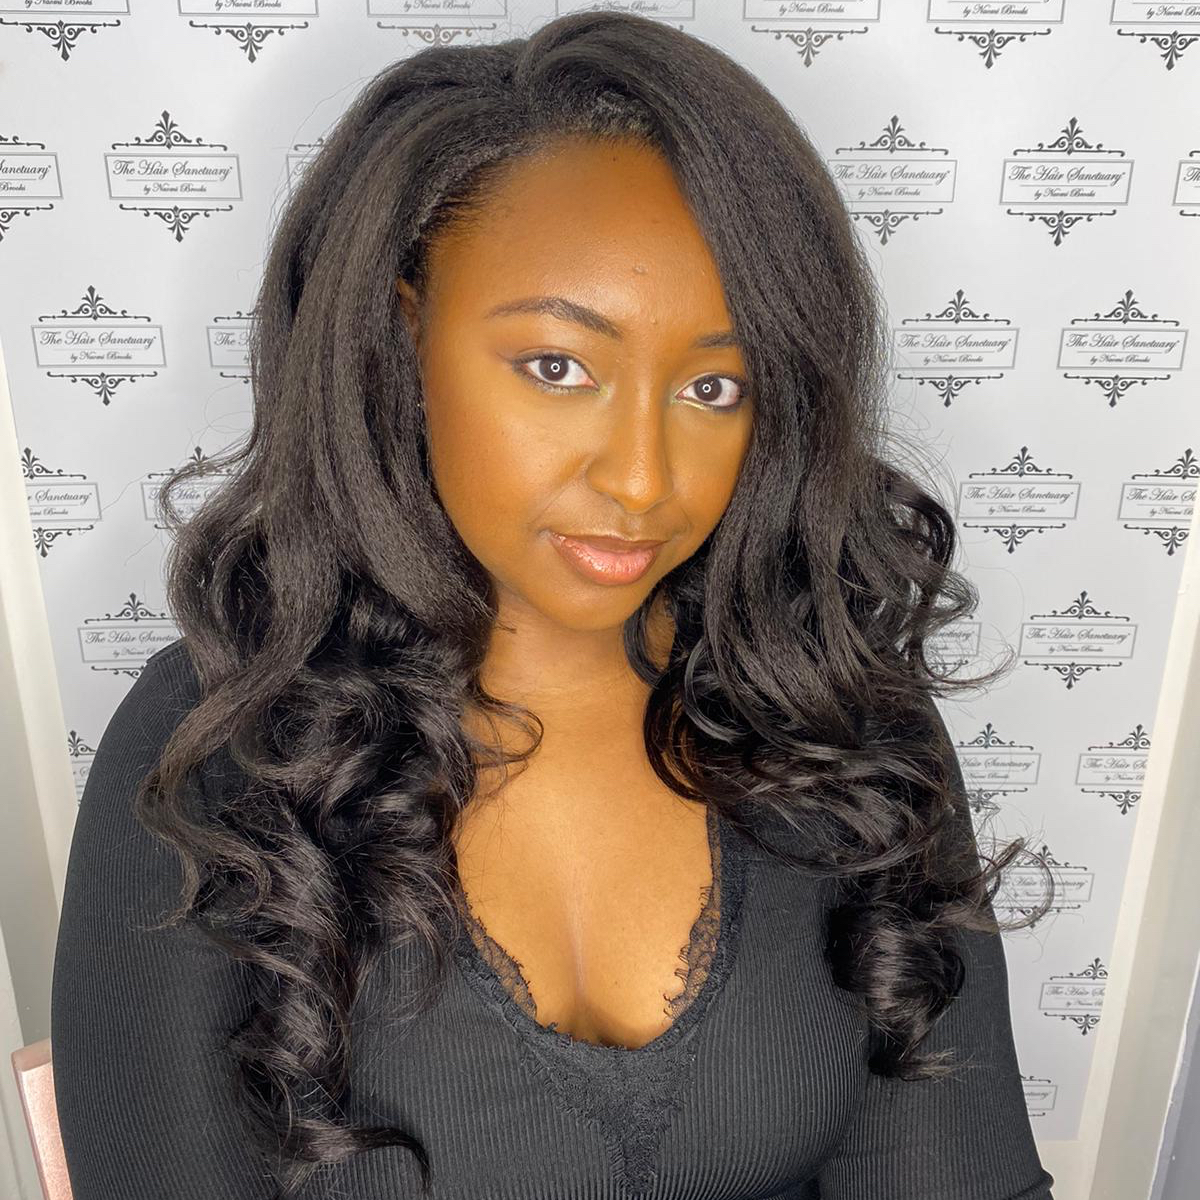 Custom U part wig made for this beaut 😍 

Any enquiries call us on 0161 536 1249 
.
.
.
.
.
#afrohair #naturalhair #protectivestyles #upartwig #wiglife #haircare #stylecheck #volume #curls #bounce #wcw #manchesterhairsalon